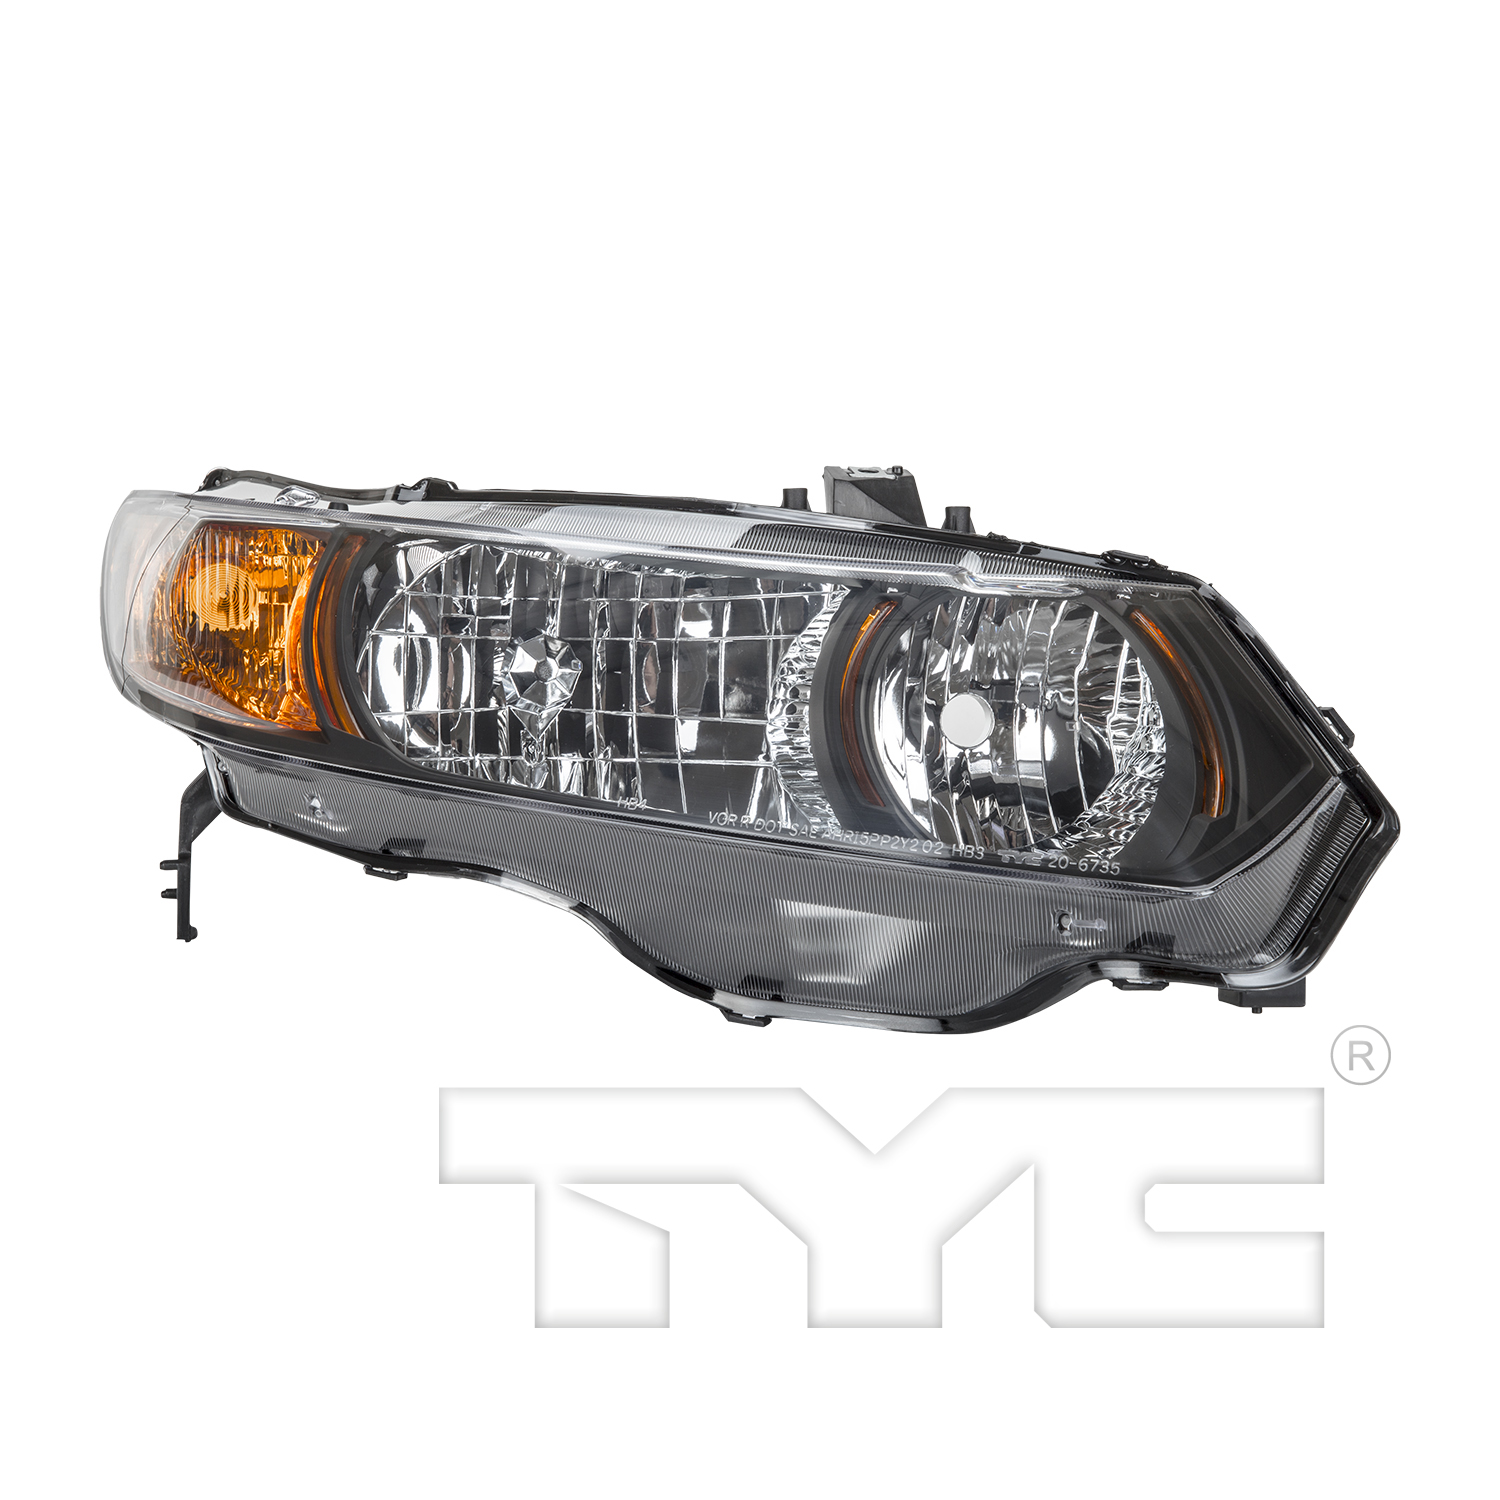 Aftermarket HEADLIGHTS for HONDA - CIVIC, CIVIC,06-07,RT Headlamp assy composite